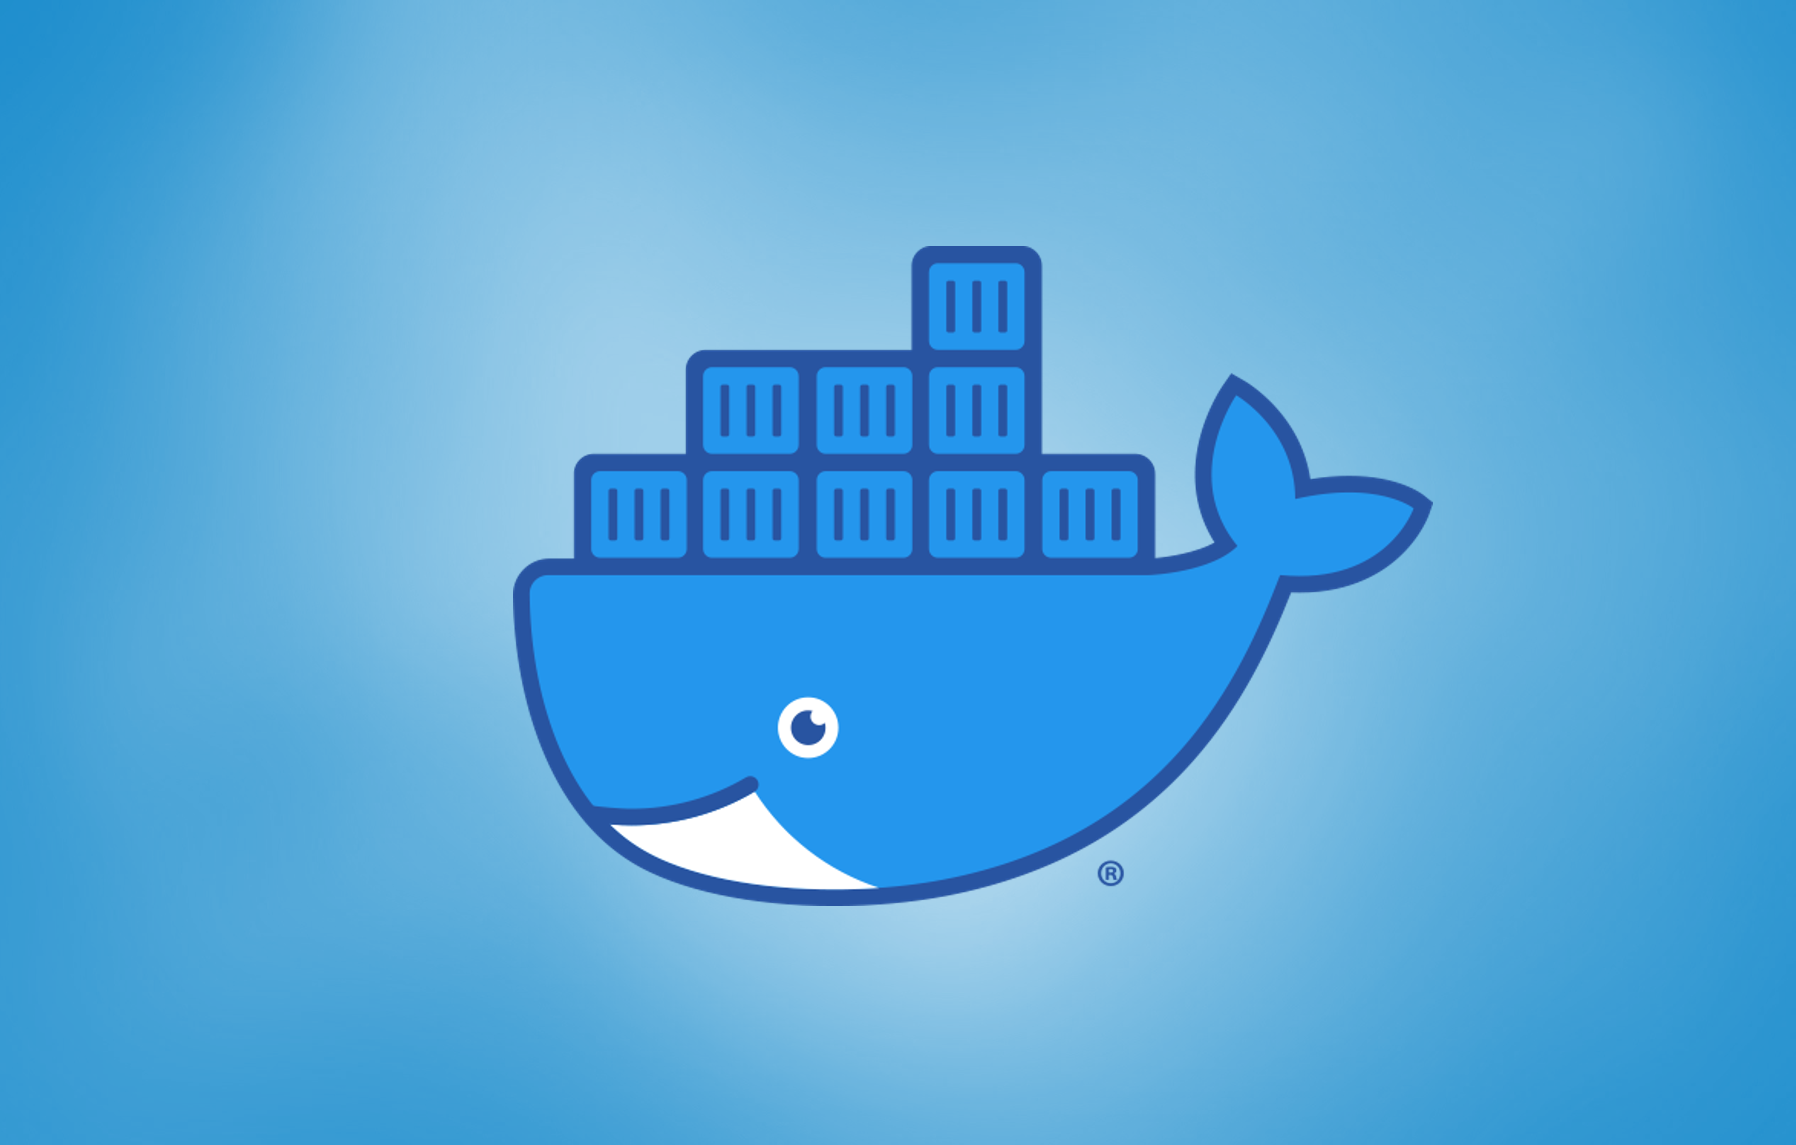 Docker Compose is a tool for running multi-container applications. It defines the services that make up your app in docker-compose.yml so they can be run together in an isolated environment.